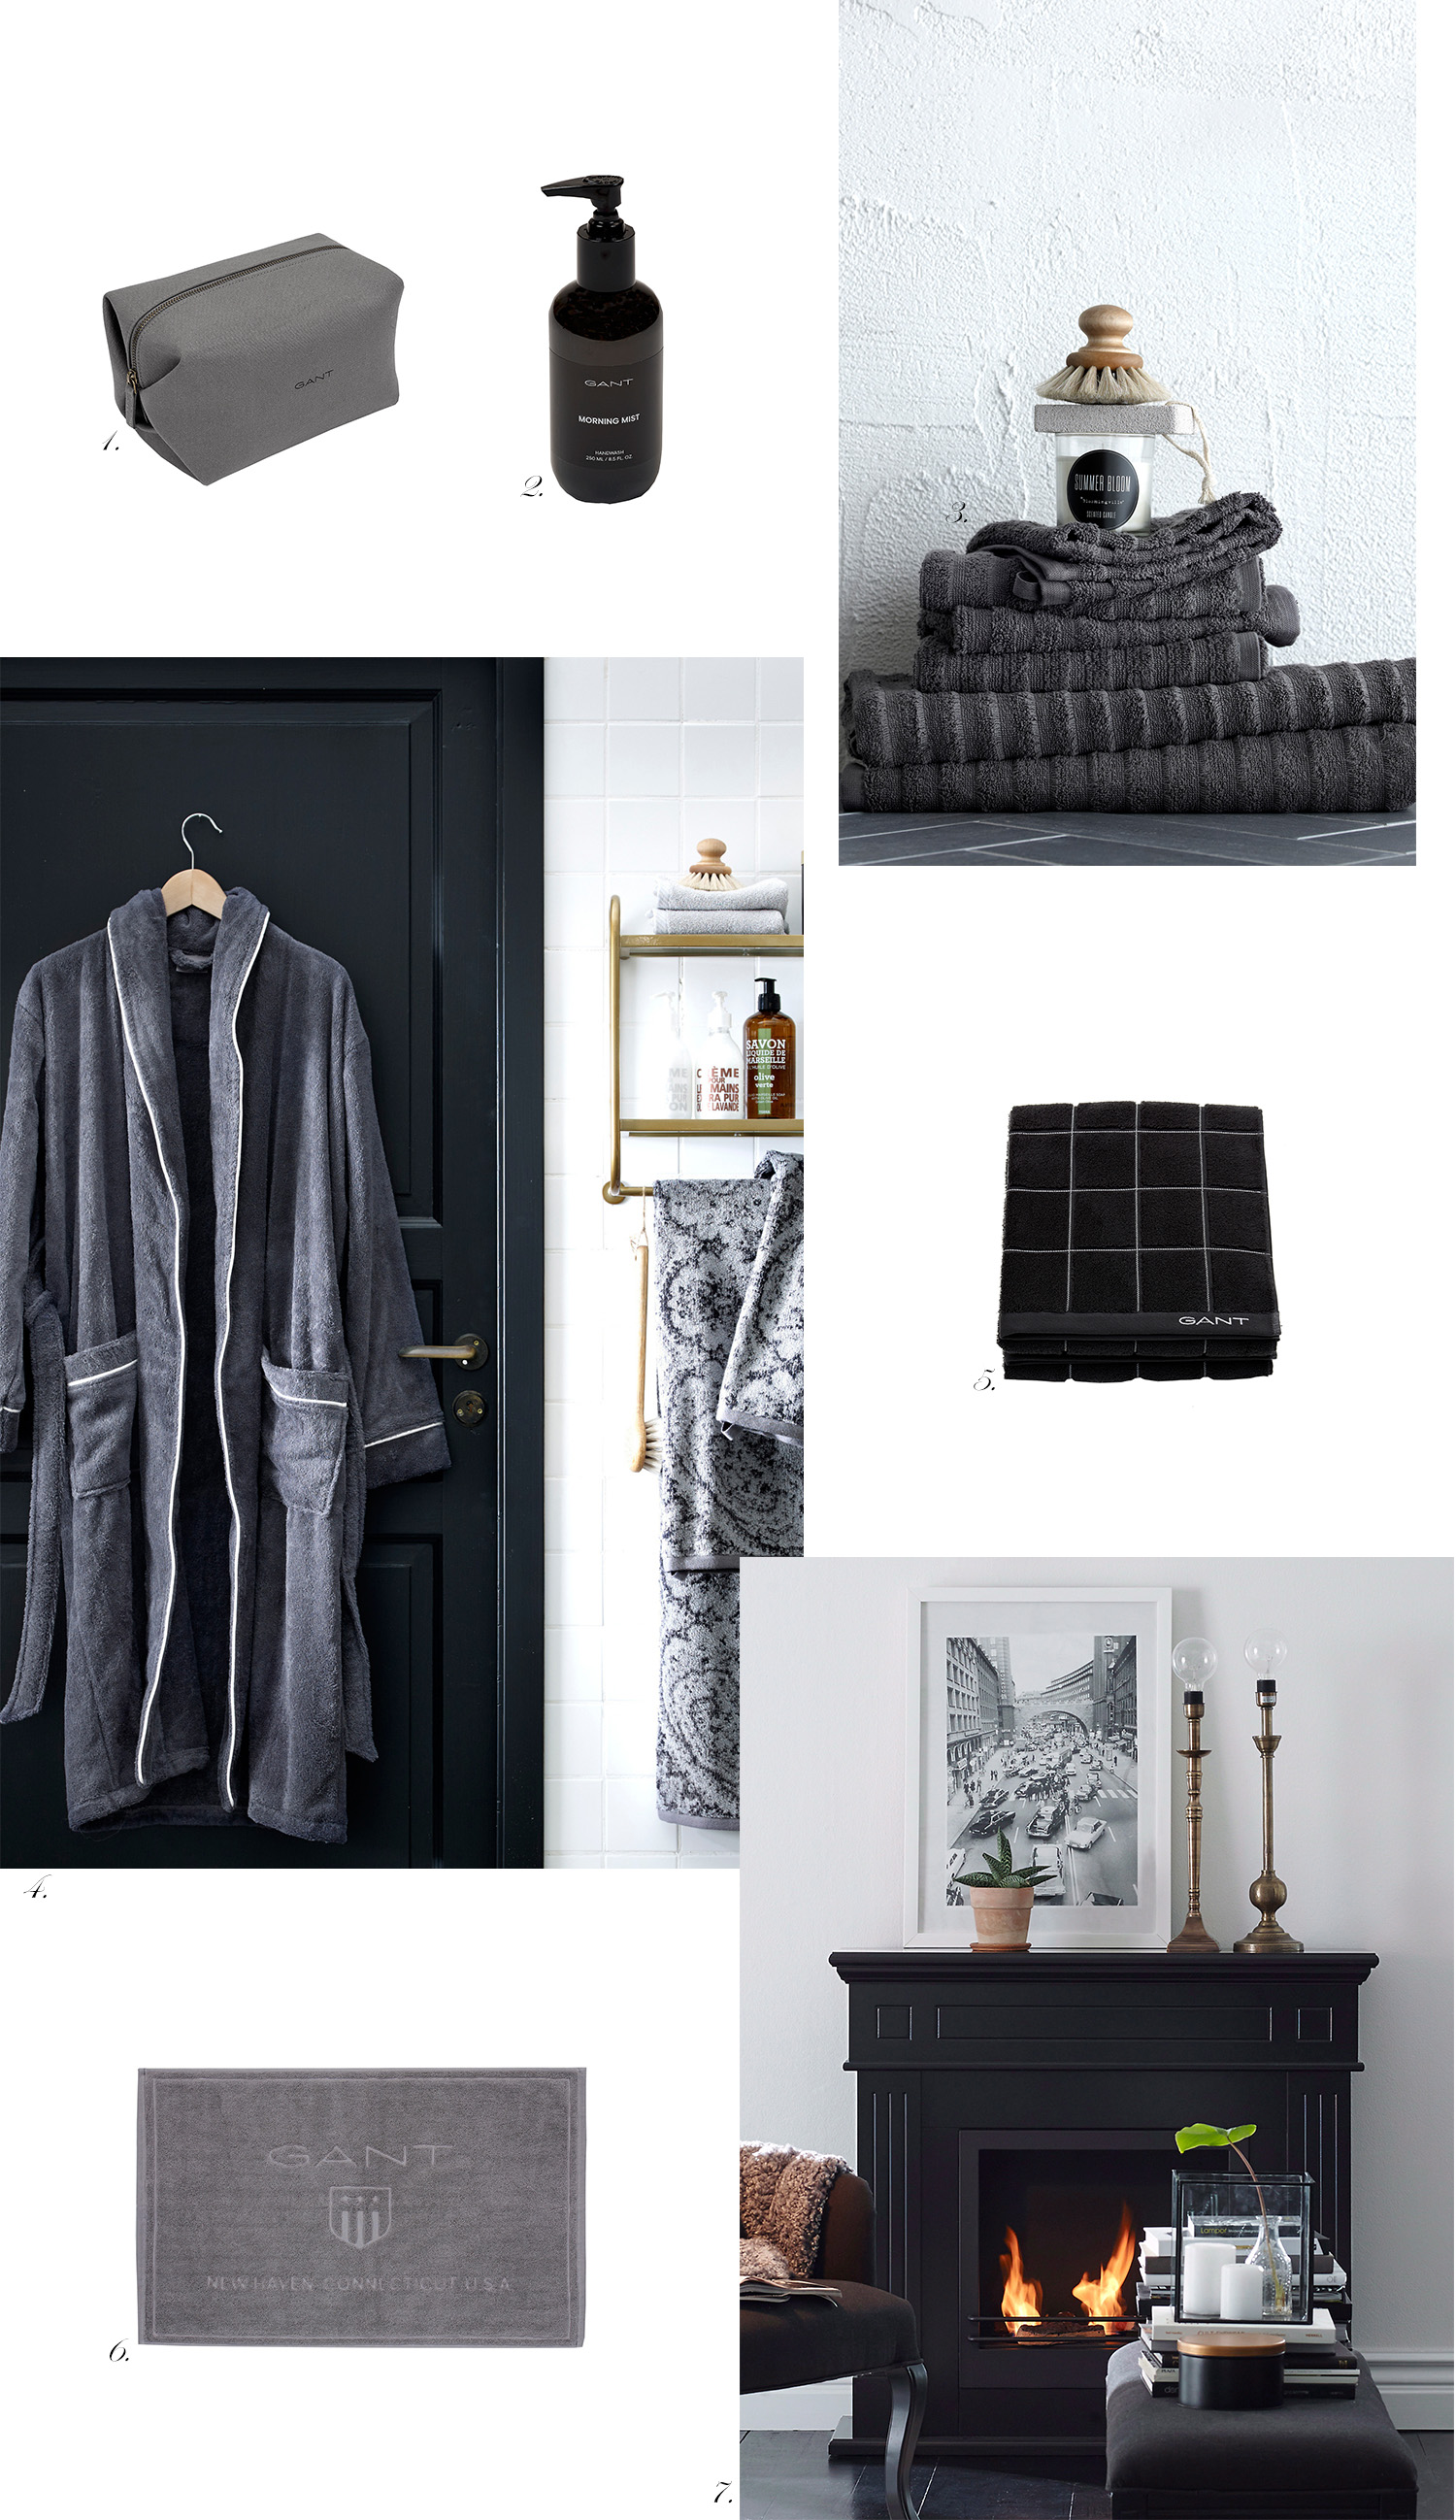 Char and the city - Bachelor pad - ideas for interior design and decoration - inspiration from webshops - grey, black and white - read more on the blog: //www.idealista.fi/charandthecity/2016/09/28/bachelor-pad #bachelorpad #interior #design 